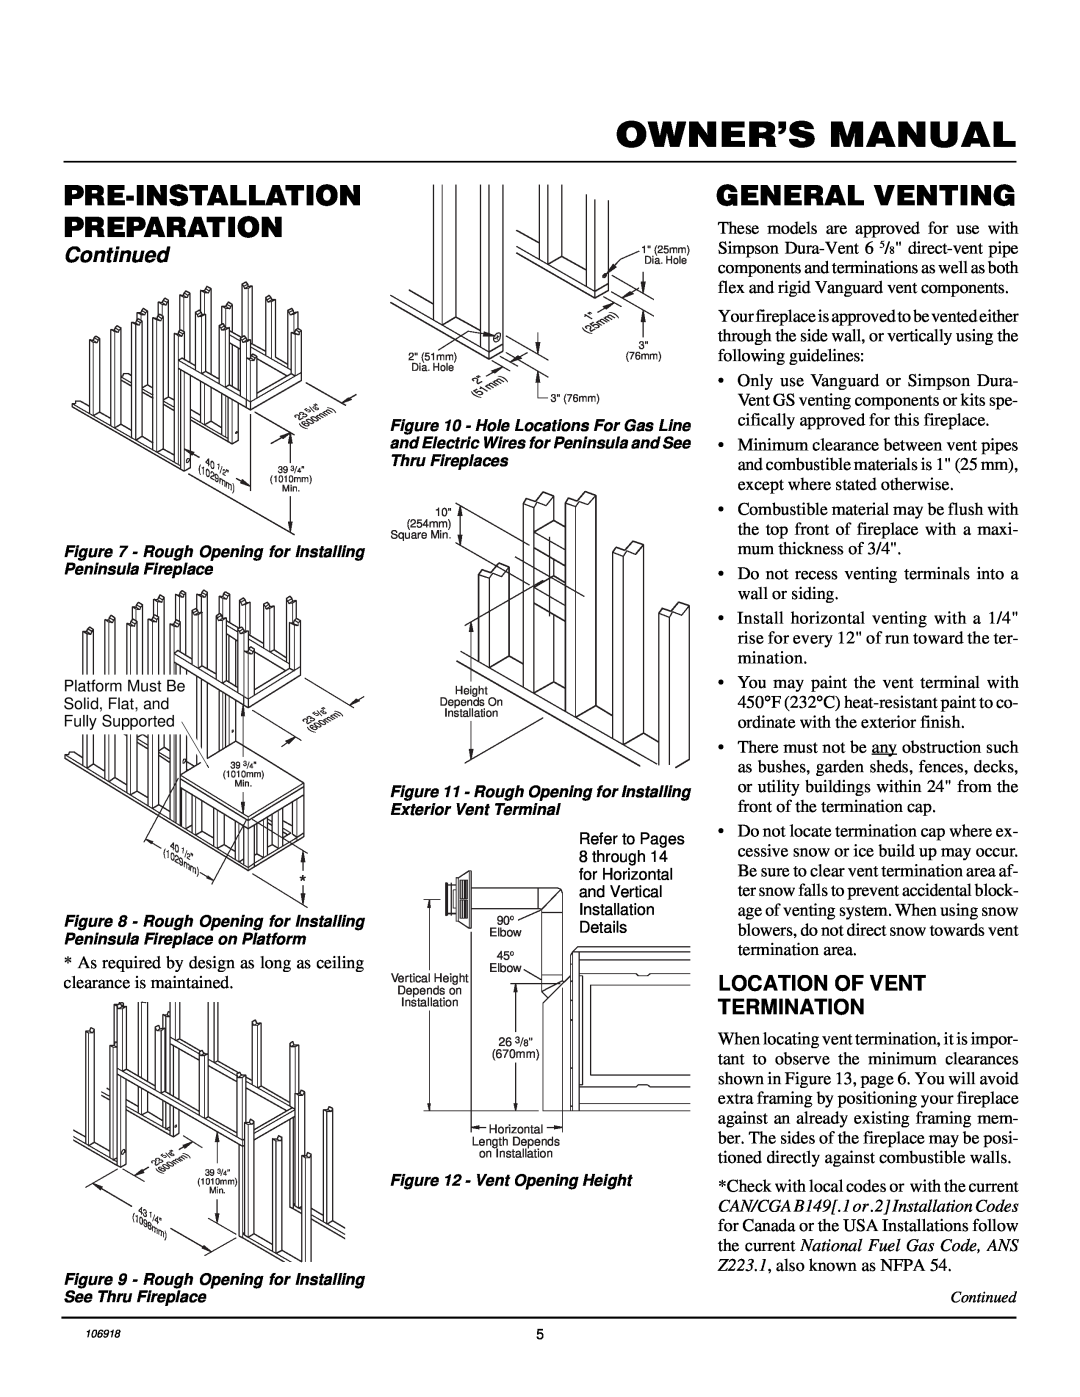 Vanguard Heating VDDVF36STN/STP Pre-Installation Preparation, General Venting, Continued, Location Of Vent Termination 